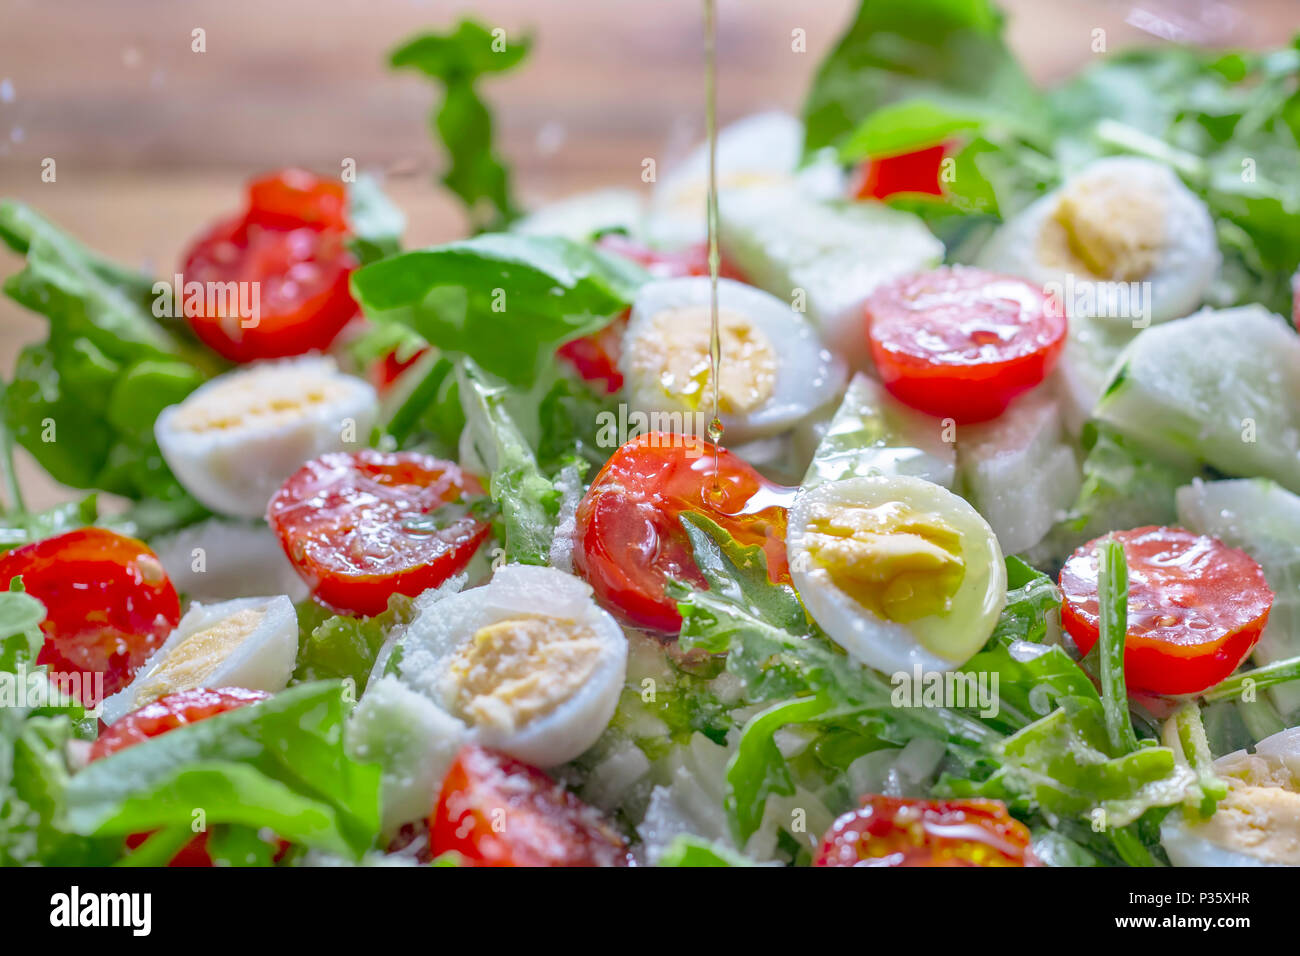 Dieting salad with lettuce, cherry tomatoes, cucumber and quail eggs Stock Photo